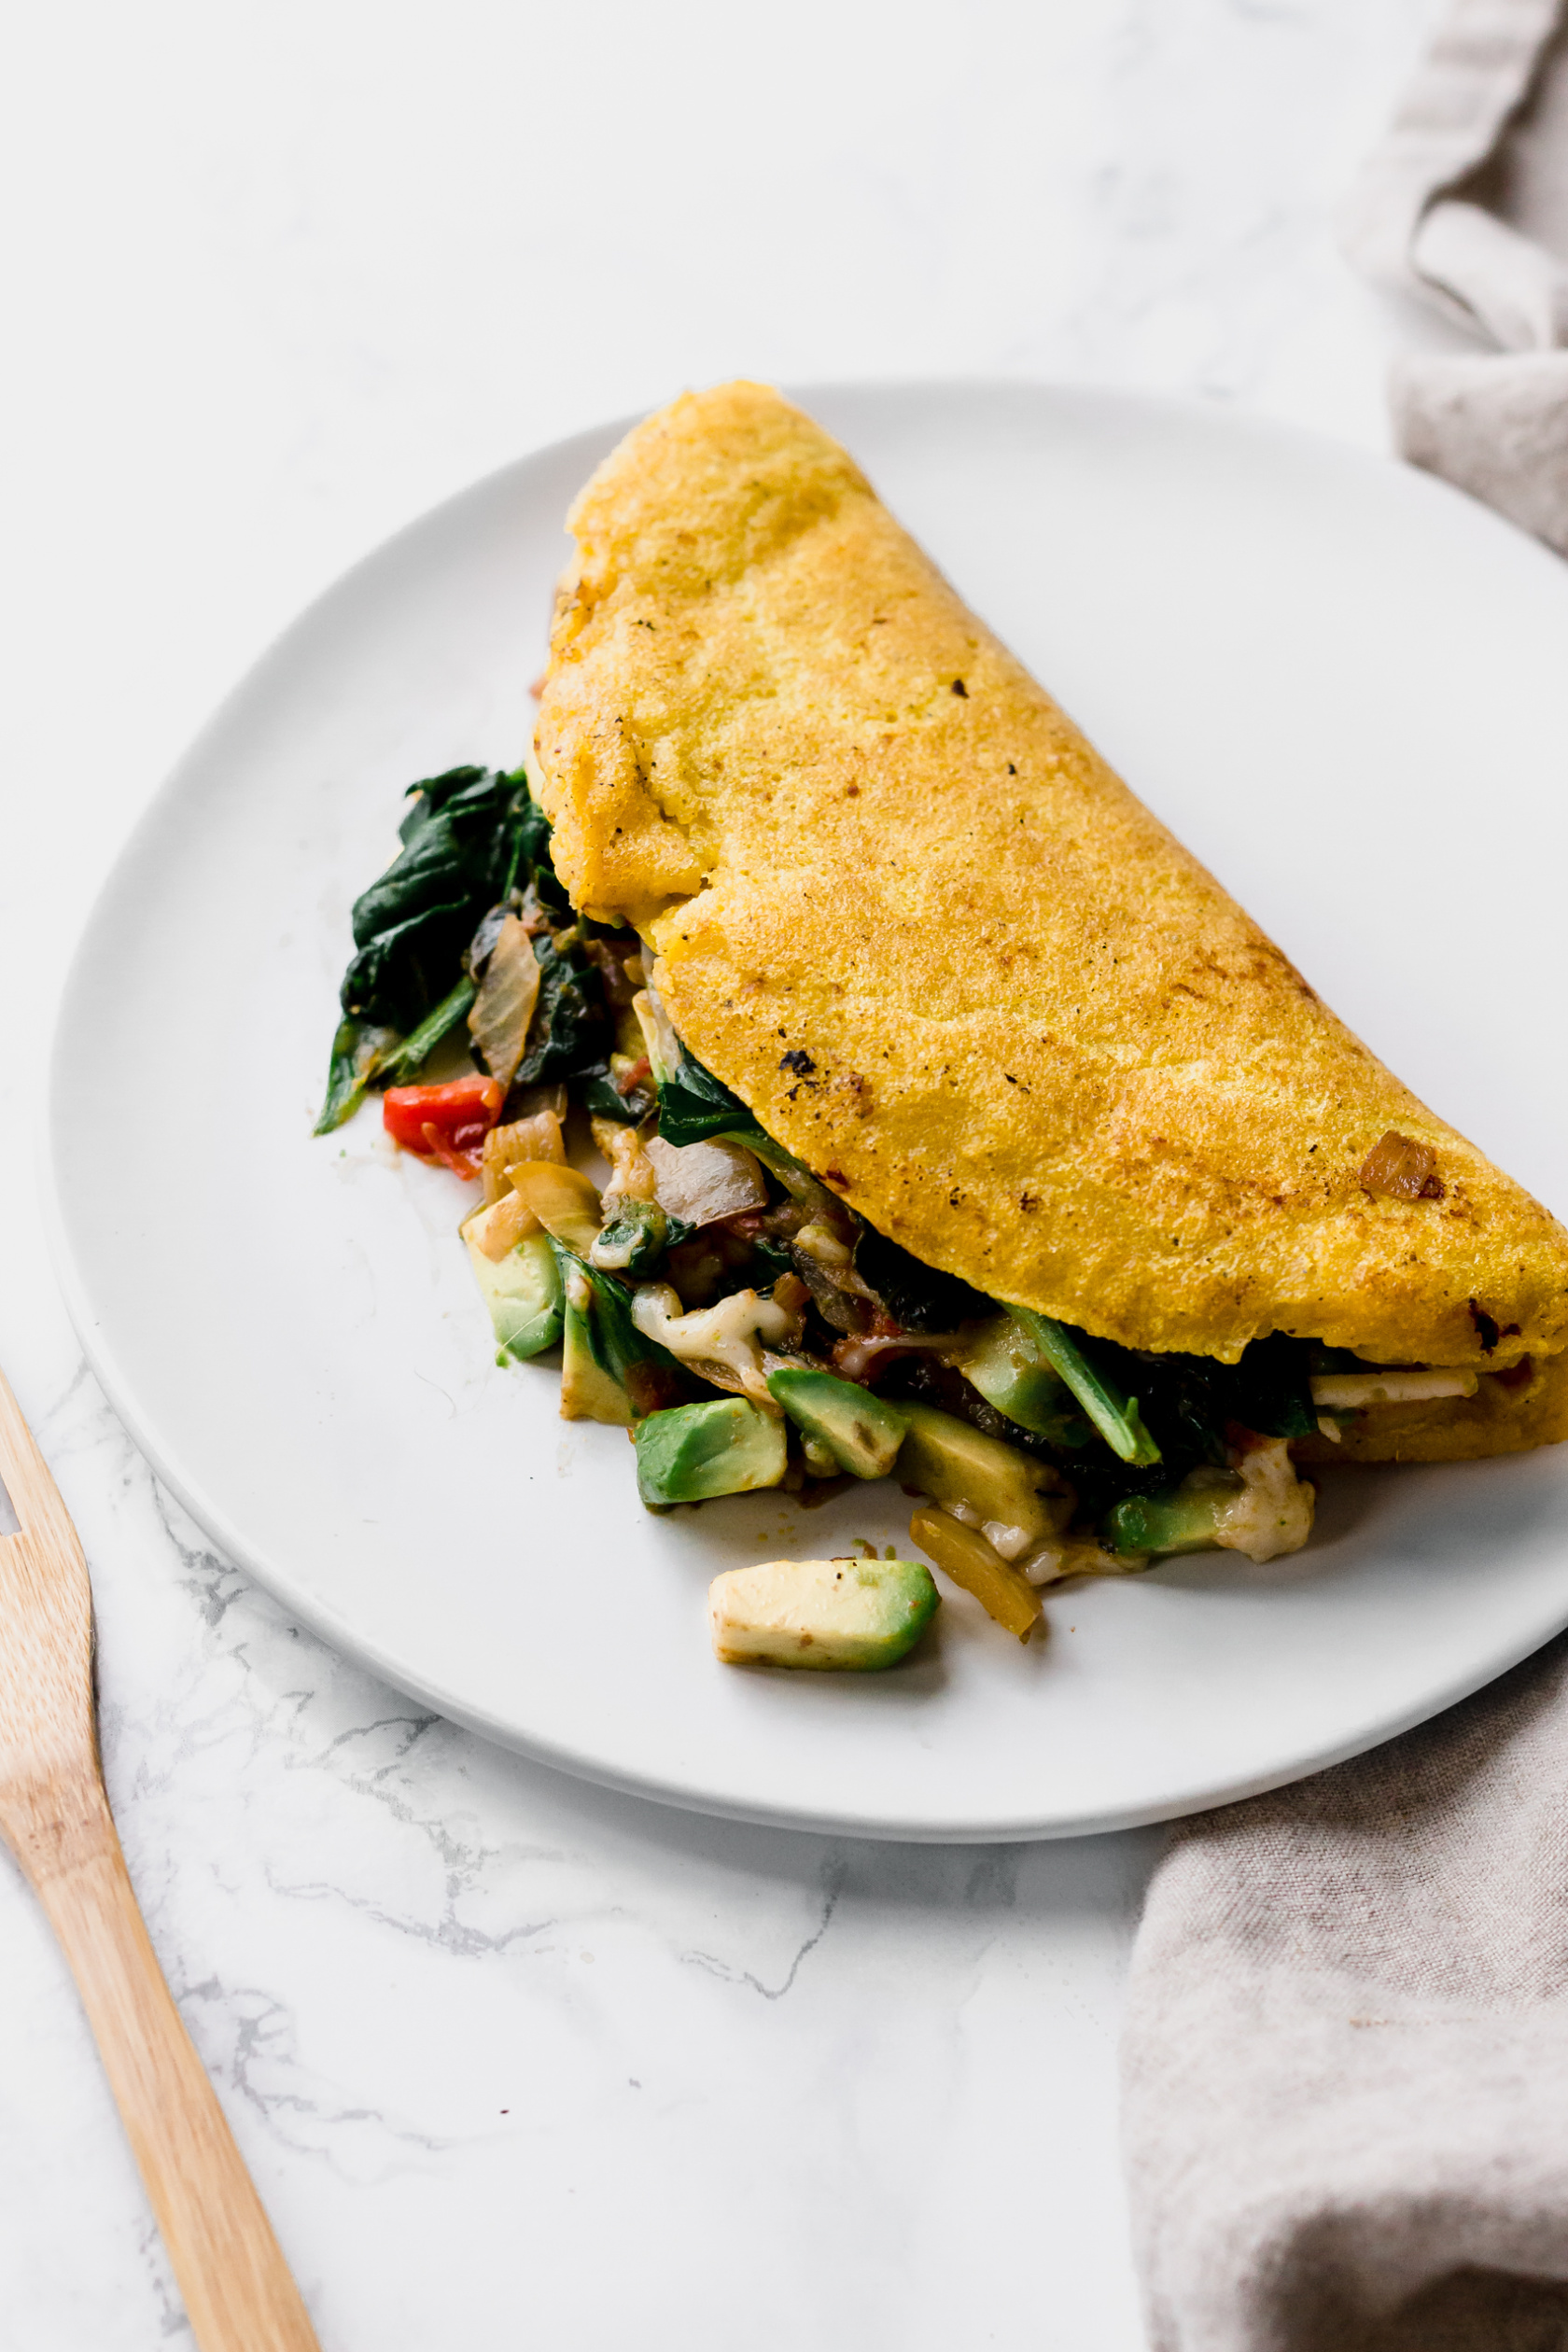 Vegan Omelette (with Vegetables and Avocado) – Emilie Eats